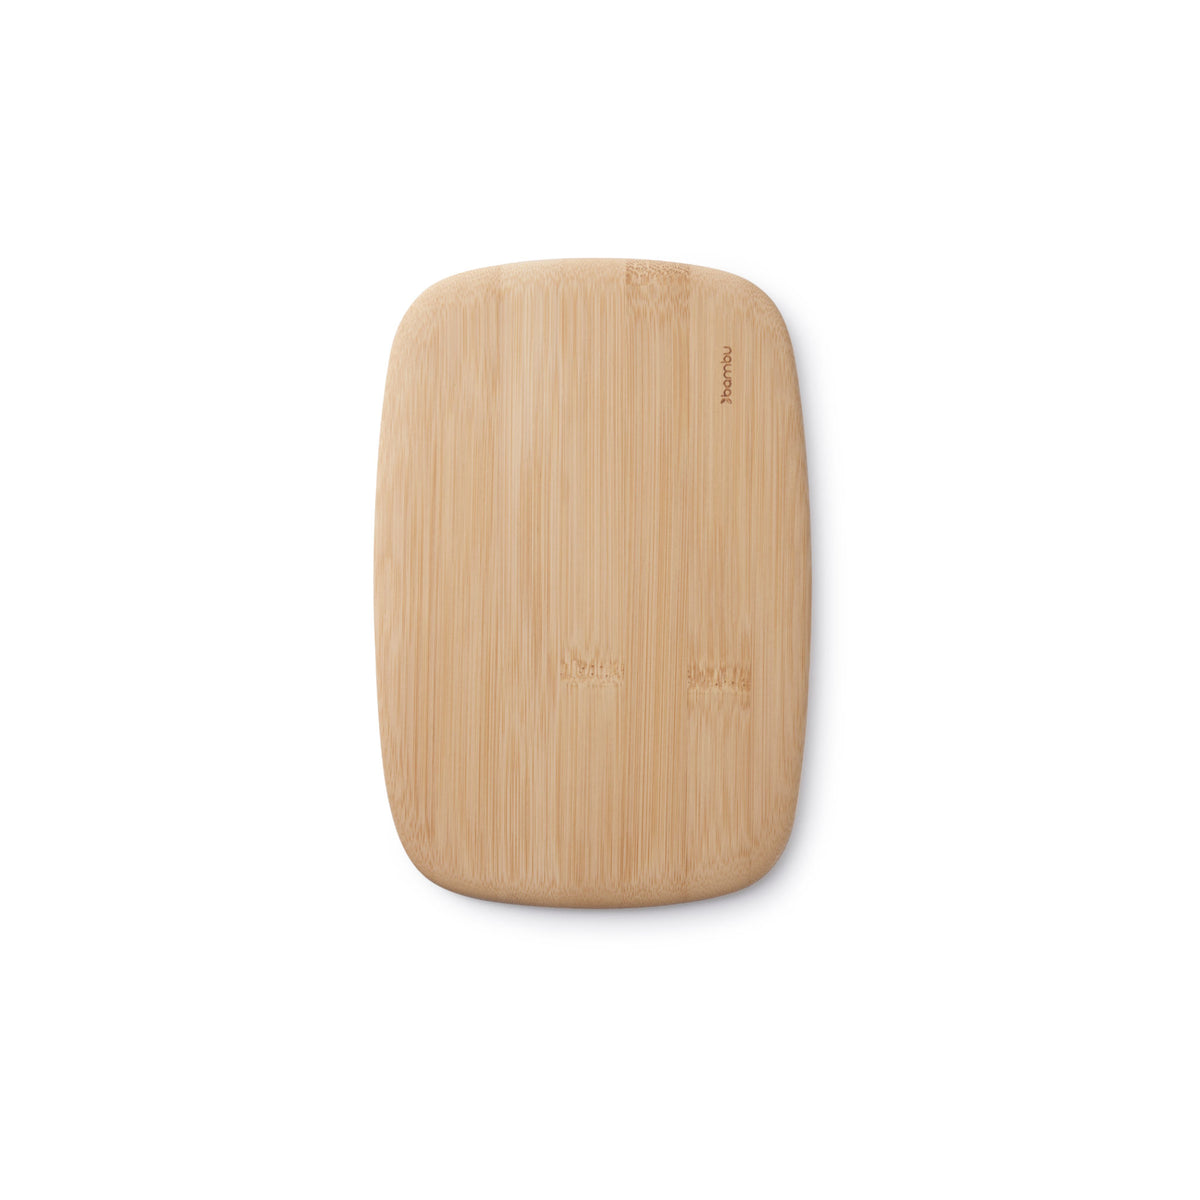 What Is the Best Cutting Board Material?